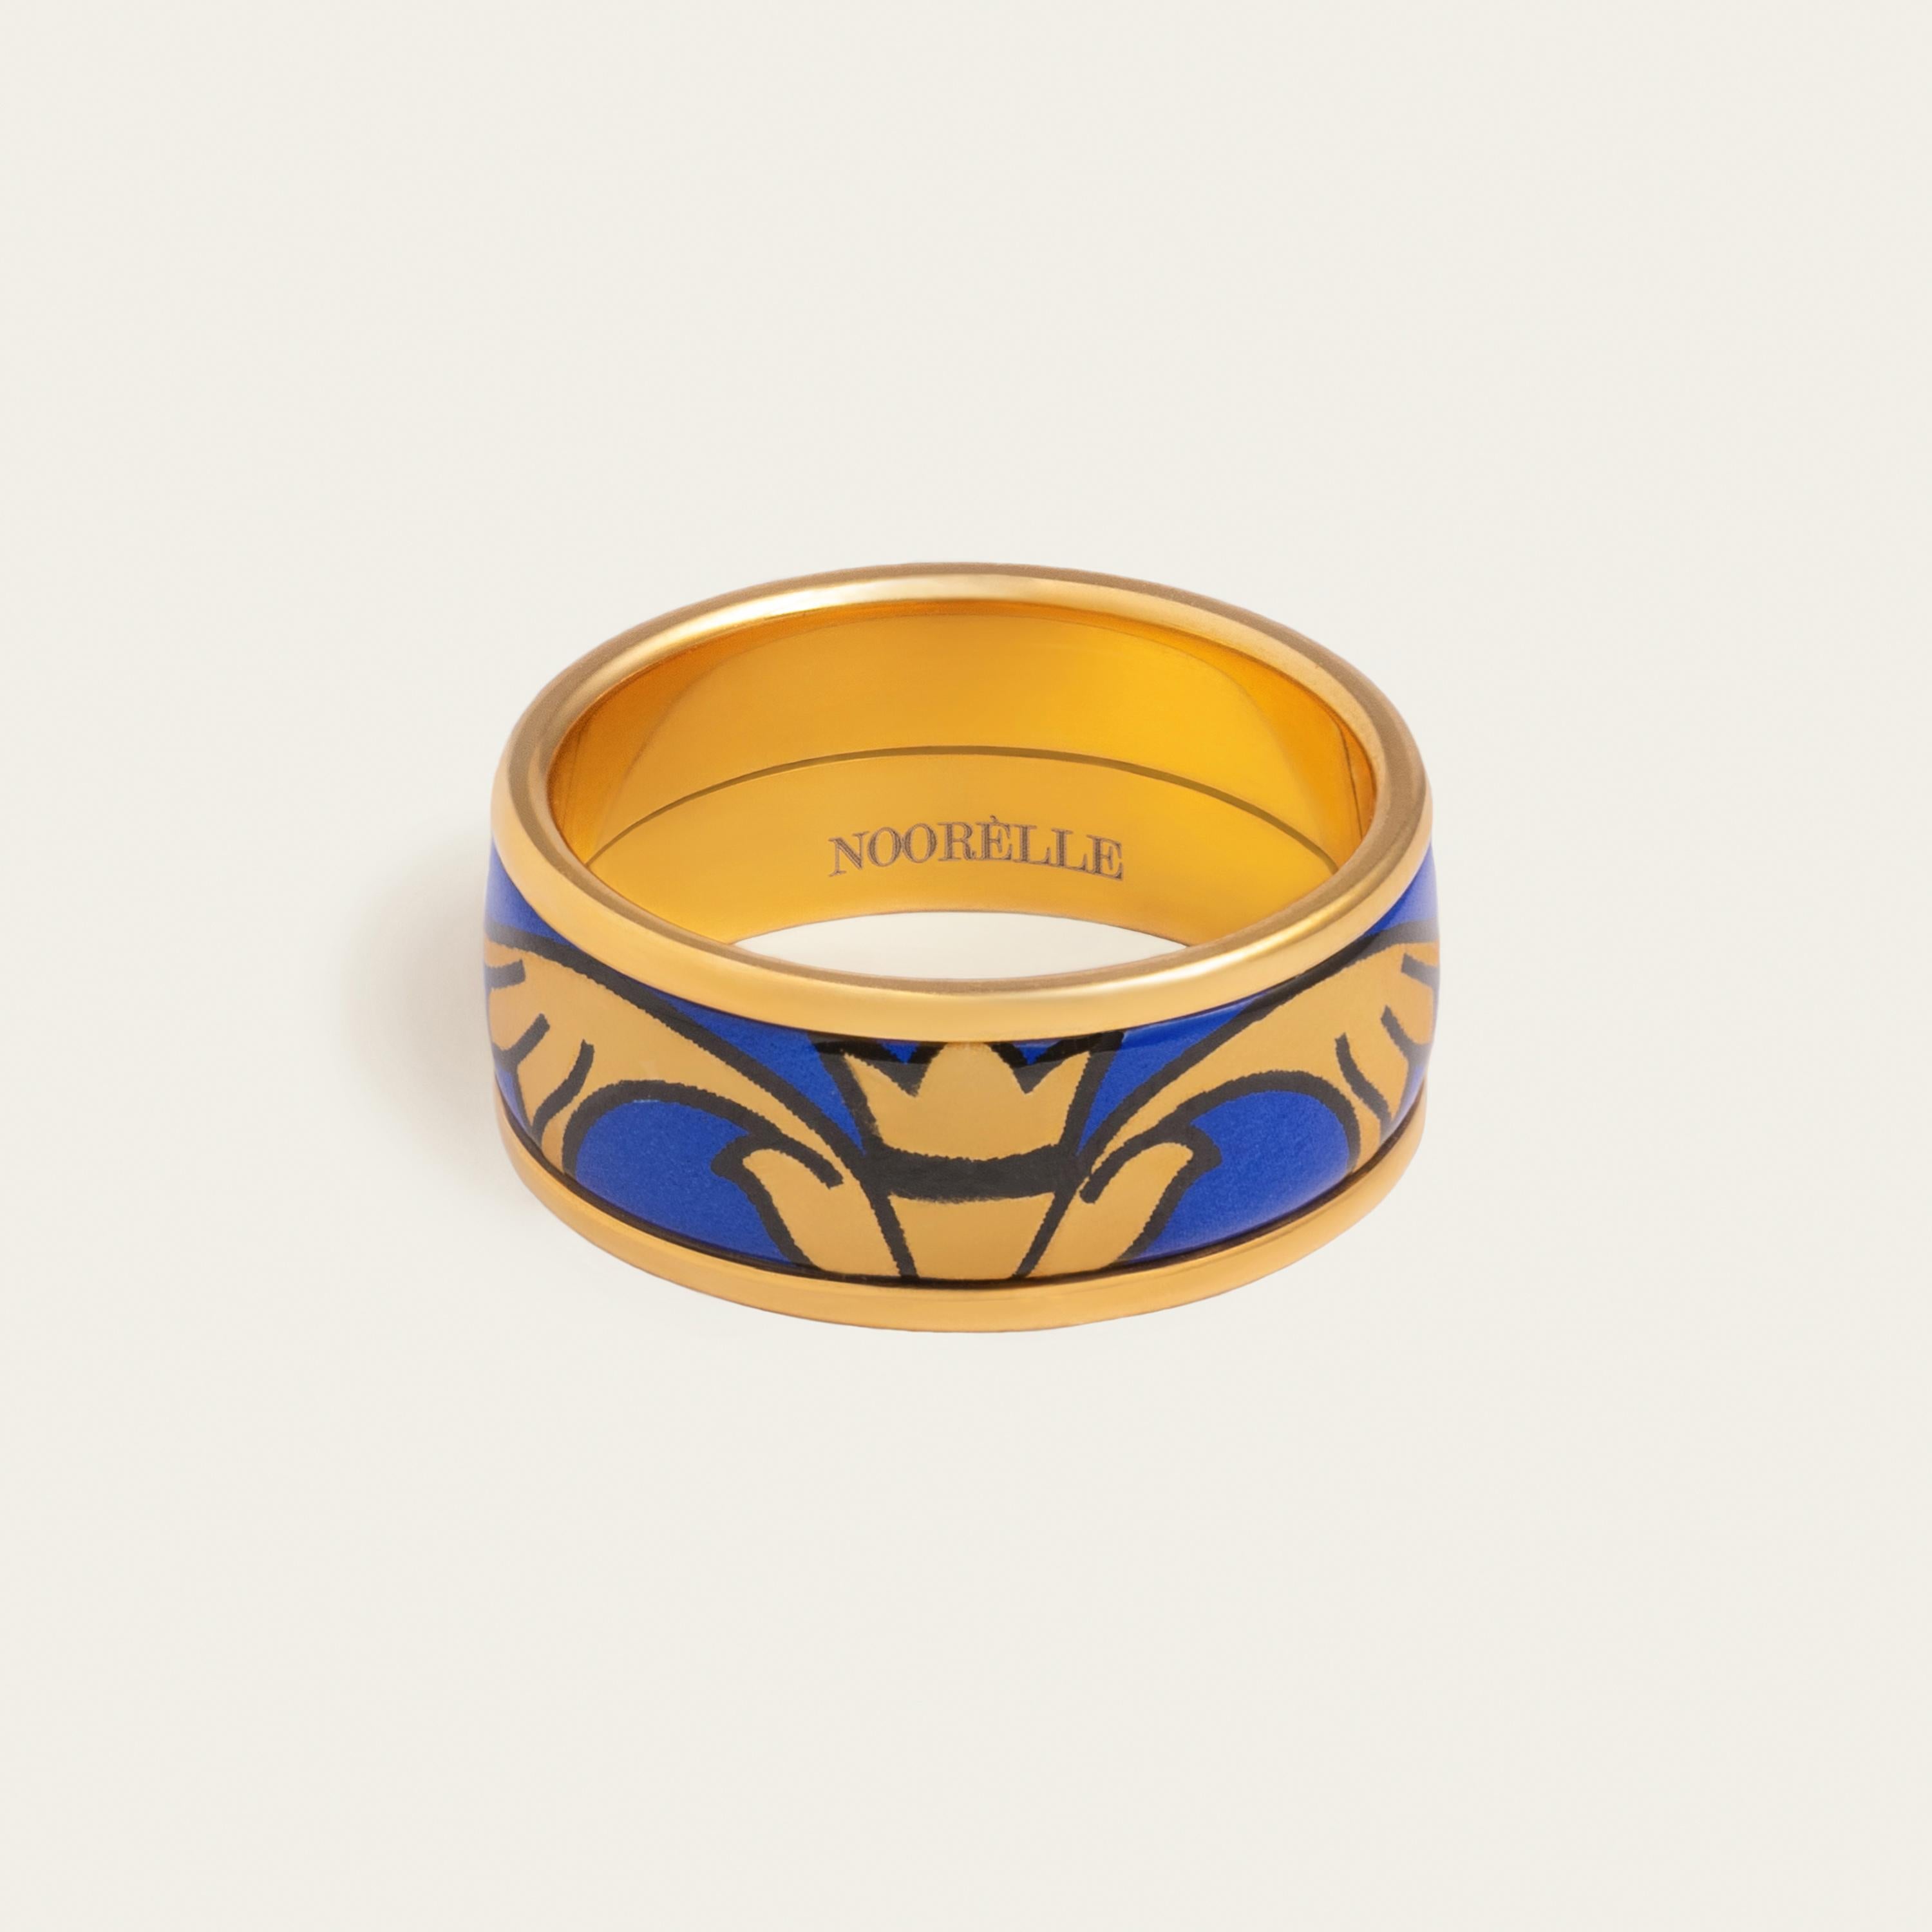 For Sale:  Blue Hand-Painted Gold-Plated Stainless Steel Band Ring with Fire Enamel Detail 2